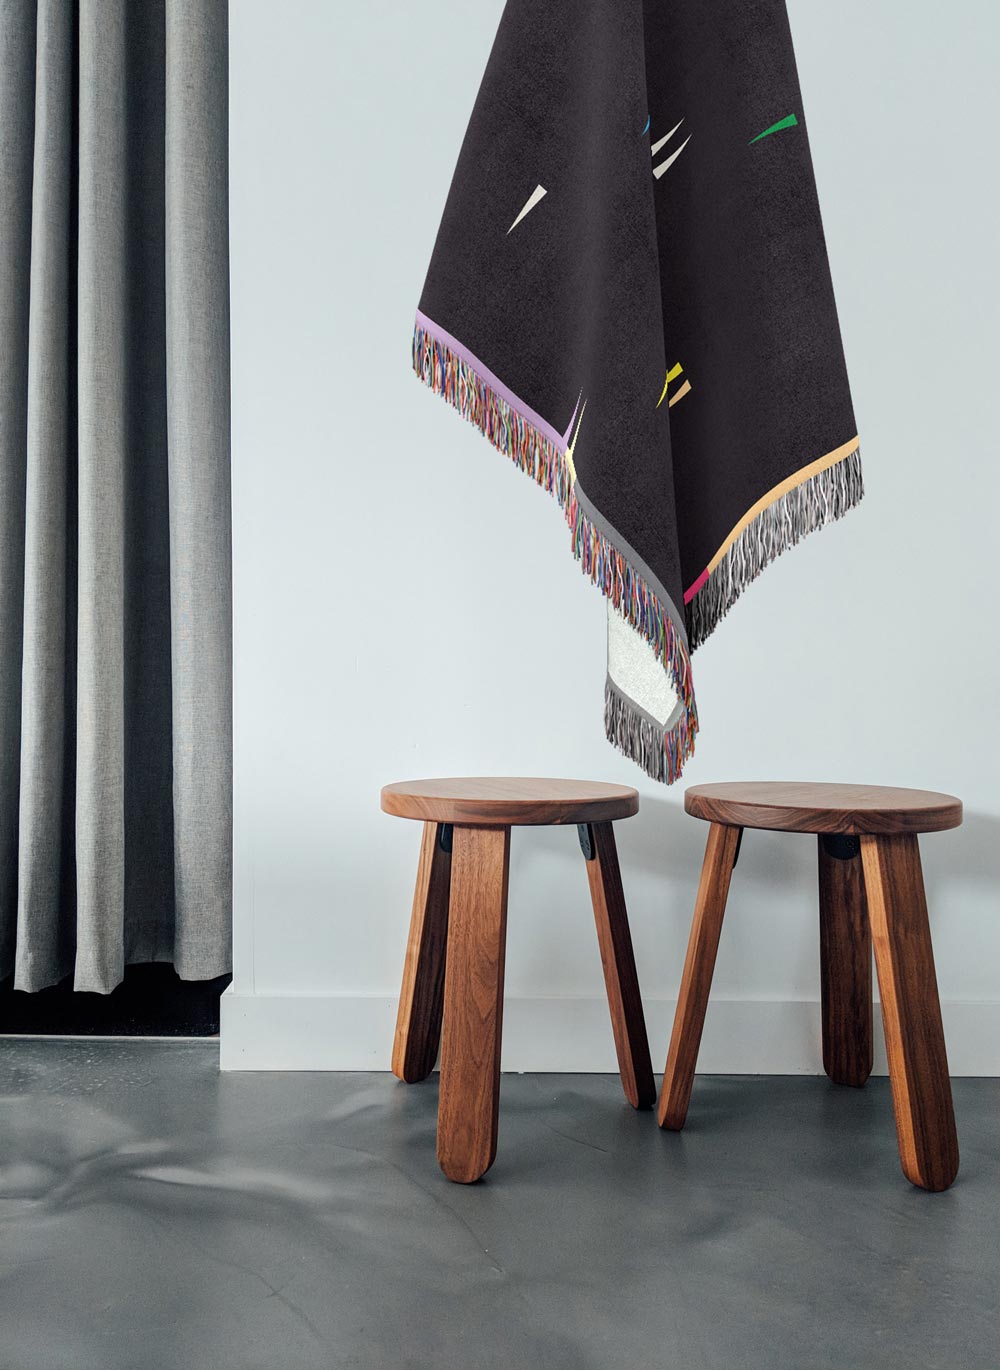 Fula V (dusk) – black woven cotton throw blanket with colorful triangles